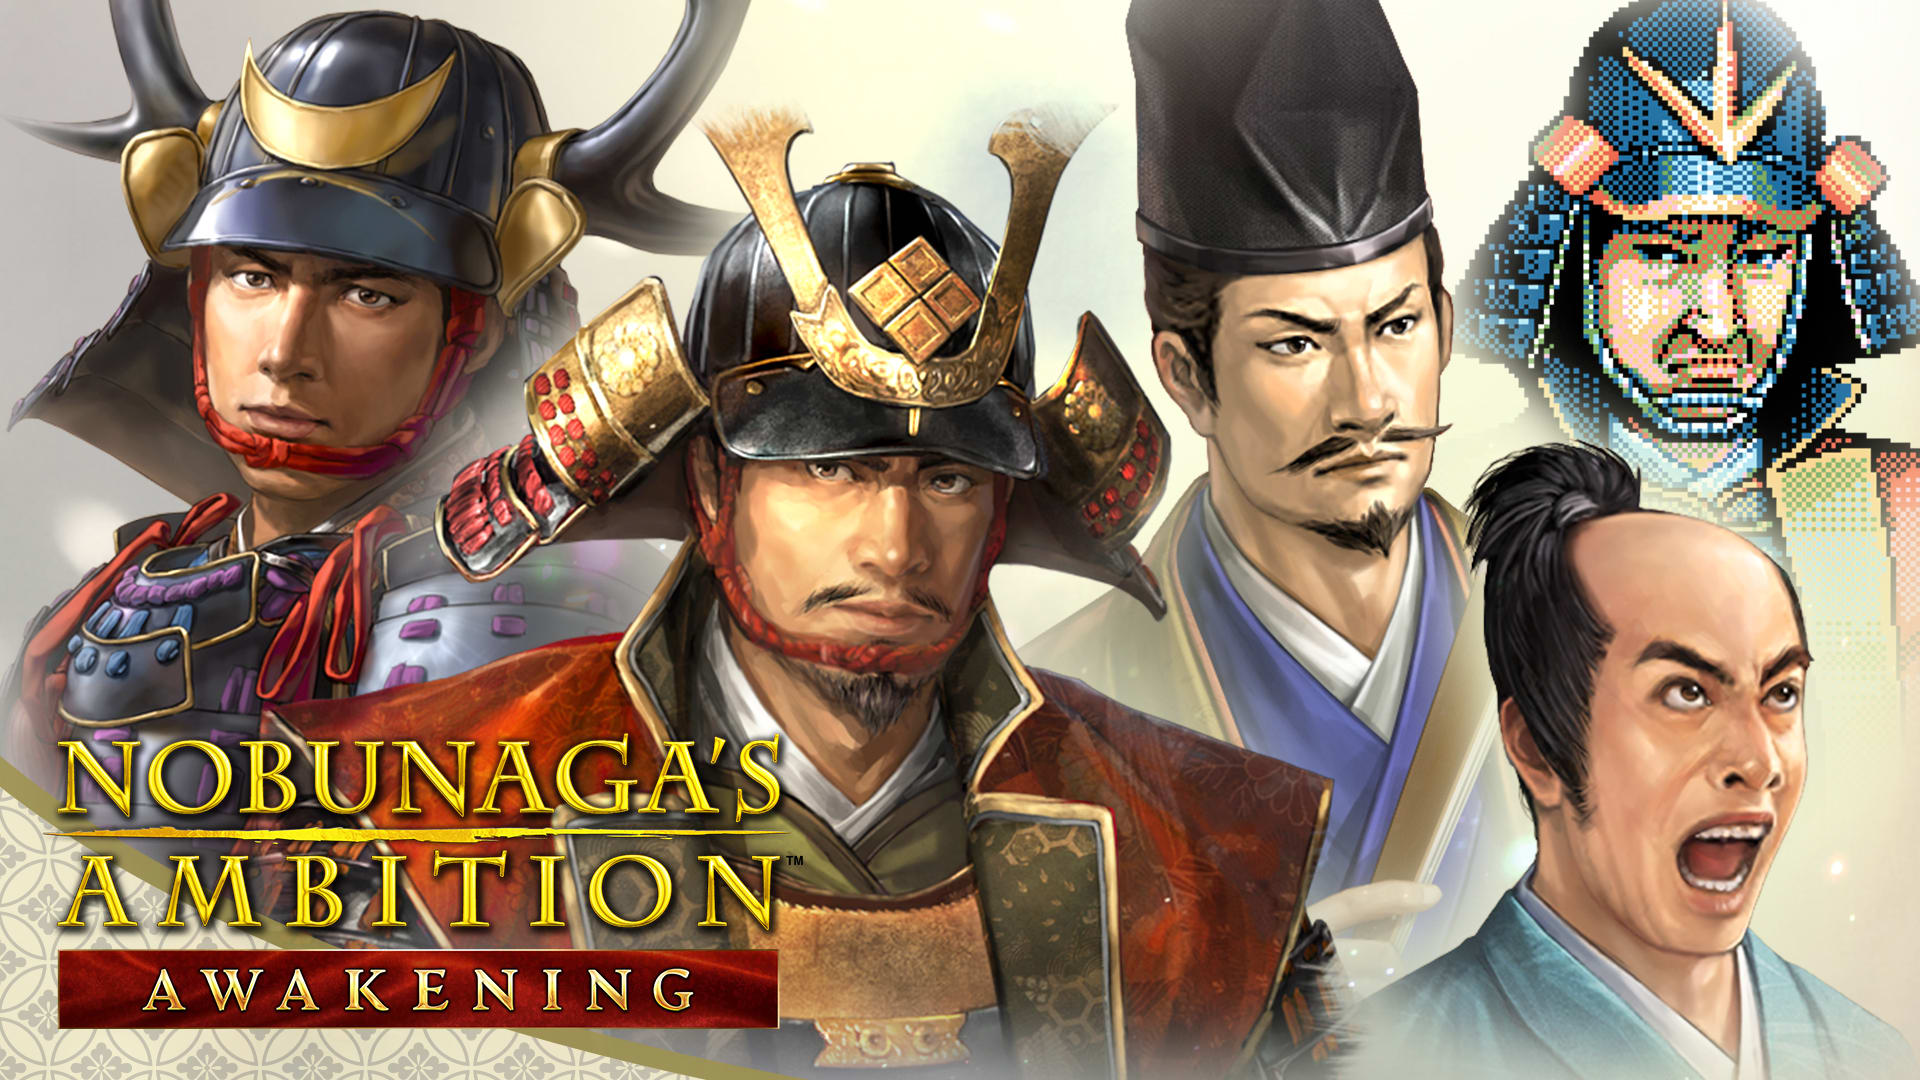 "NOBUNAGA'S AMBITION: Awakening" Additional Officer Graphics and Trait of Popular Officers from the "NOBUNAGA'S AMBITION" 40th Anniversary Series' Popularity Rankings